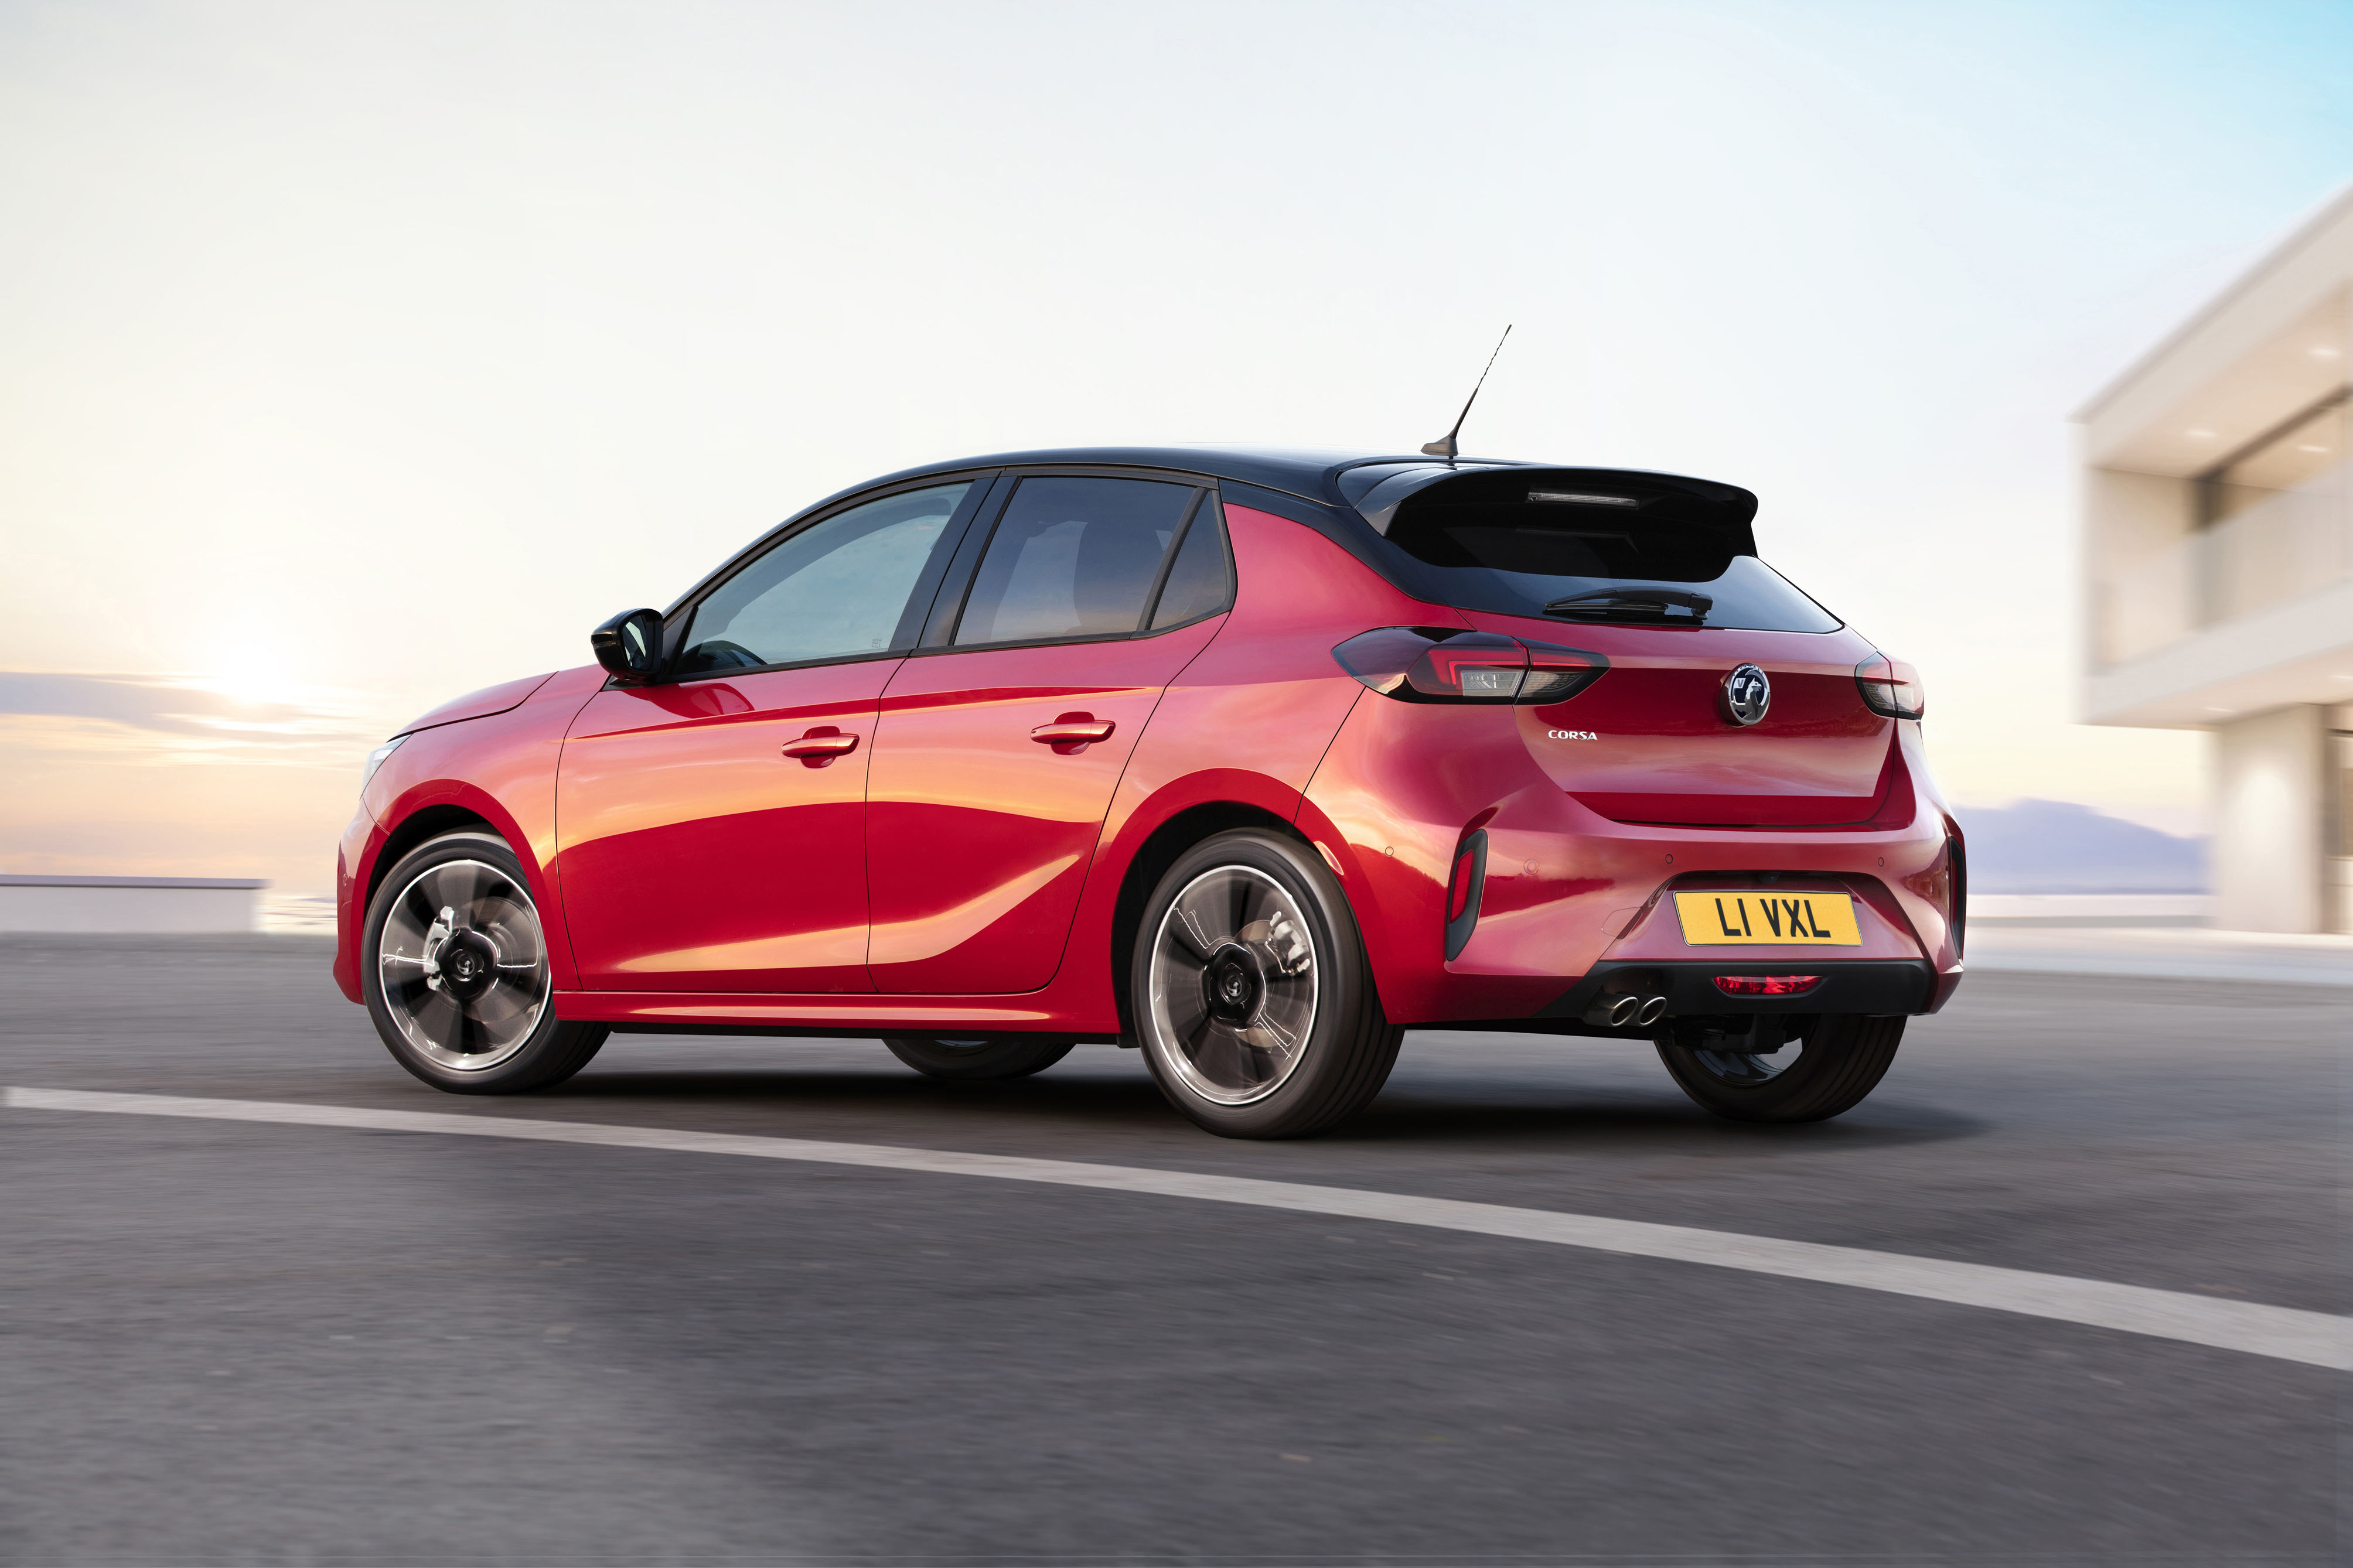 all-new-vauxhall-corsa-line-up-bolstered-with-petrol-and-diesel-power